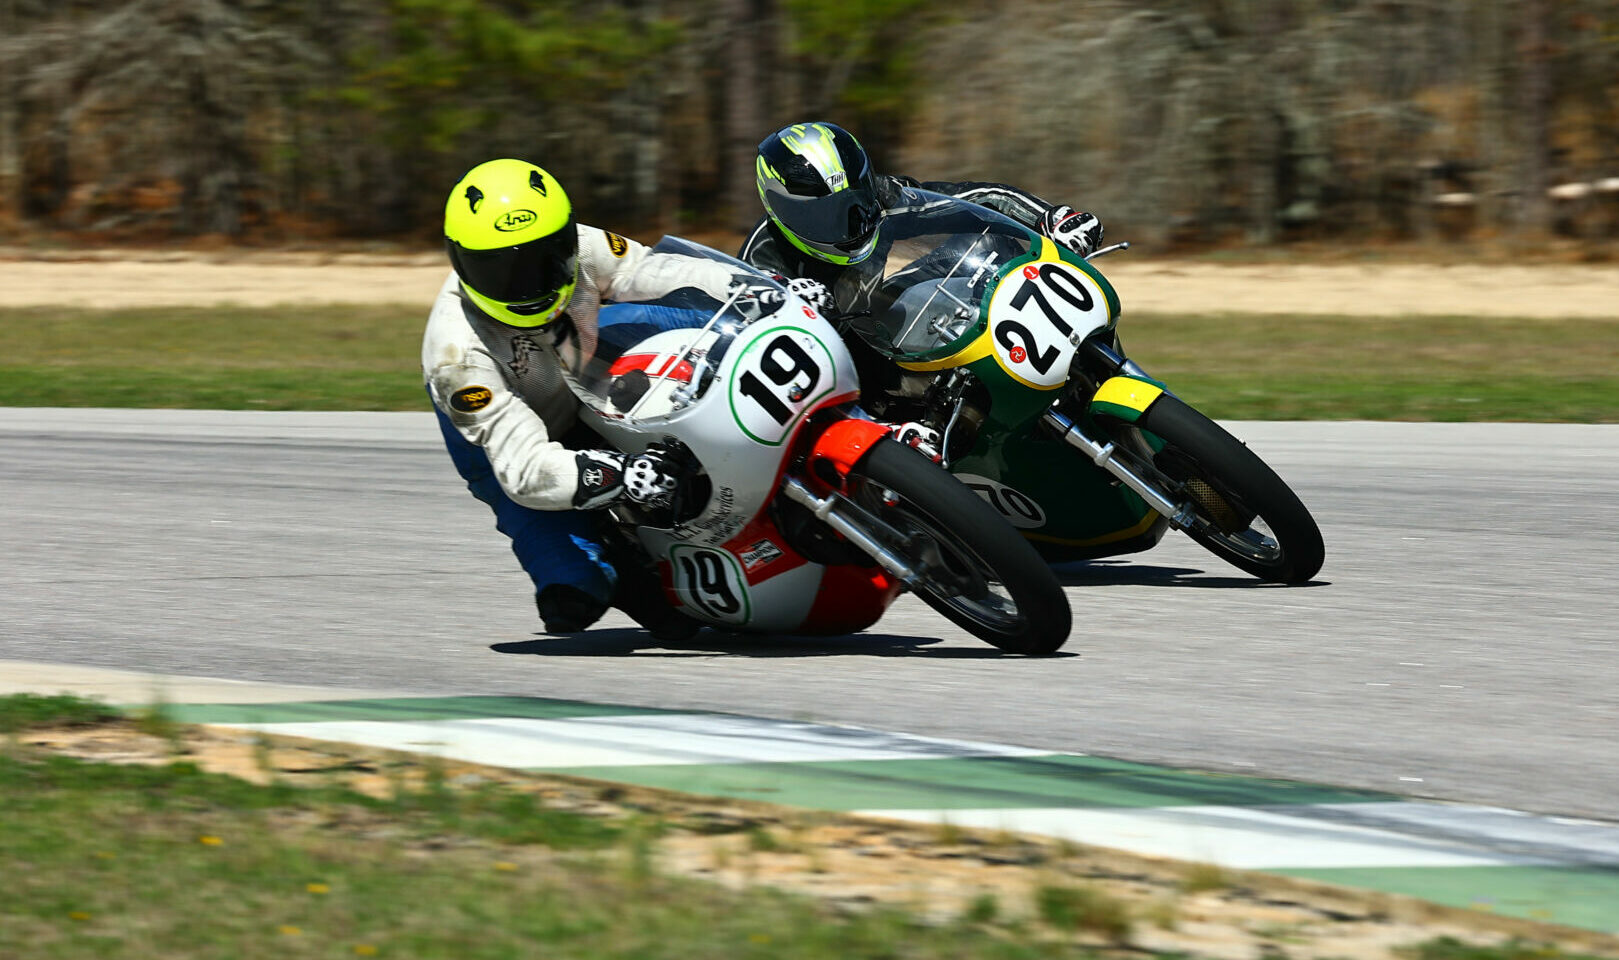 Christopher Spargo (19) and Rob Hall (270) split AHRMA Vintage Cup race wins at Carolina Motorsports Park. Photo by etechphoto.com, courtesy AHRMA.